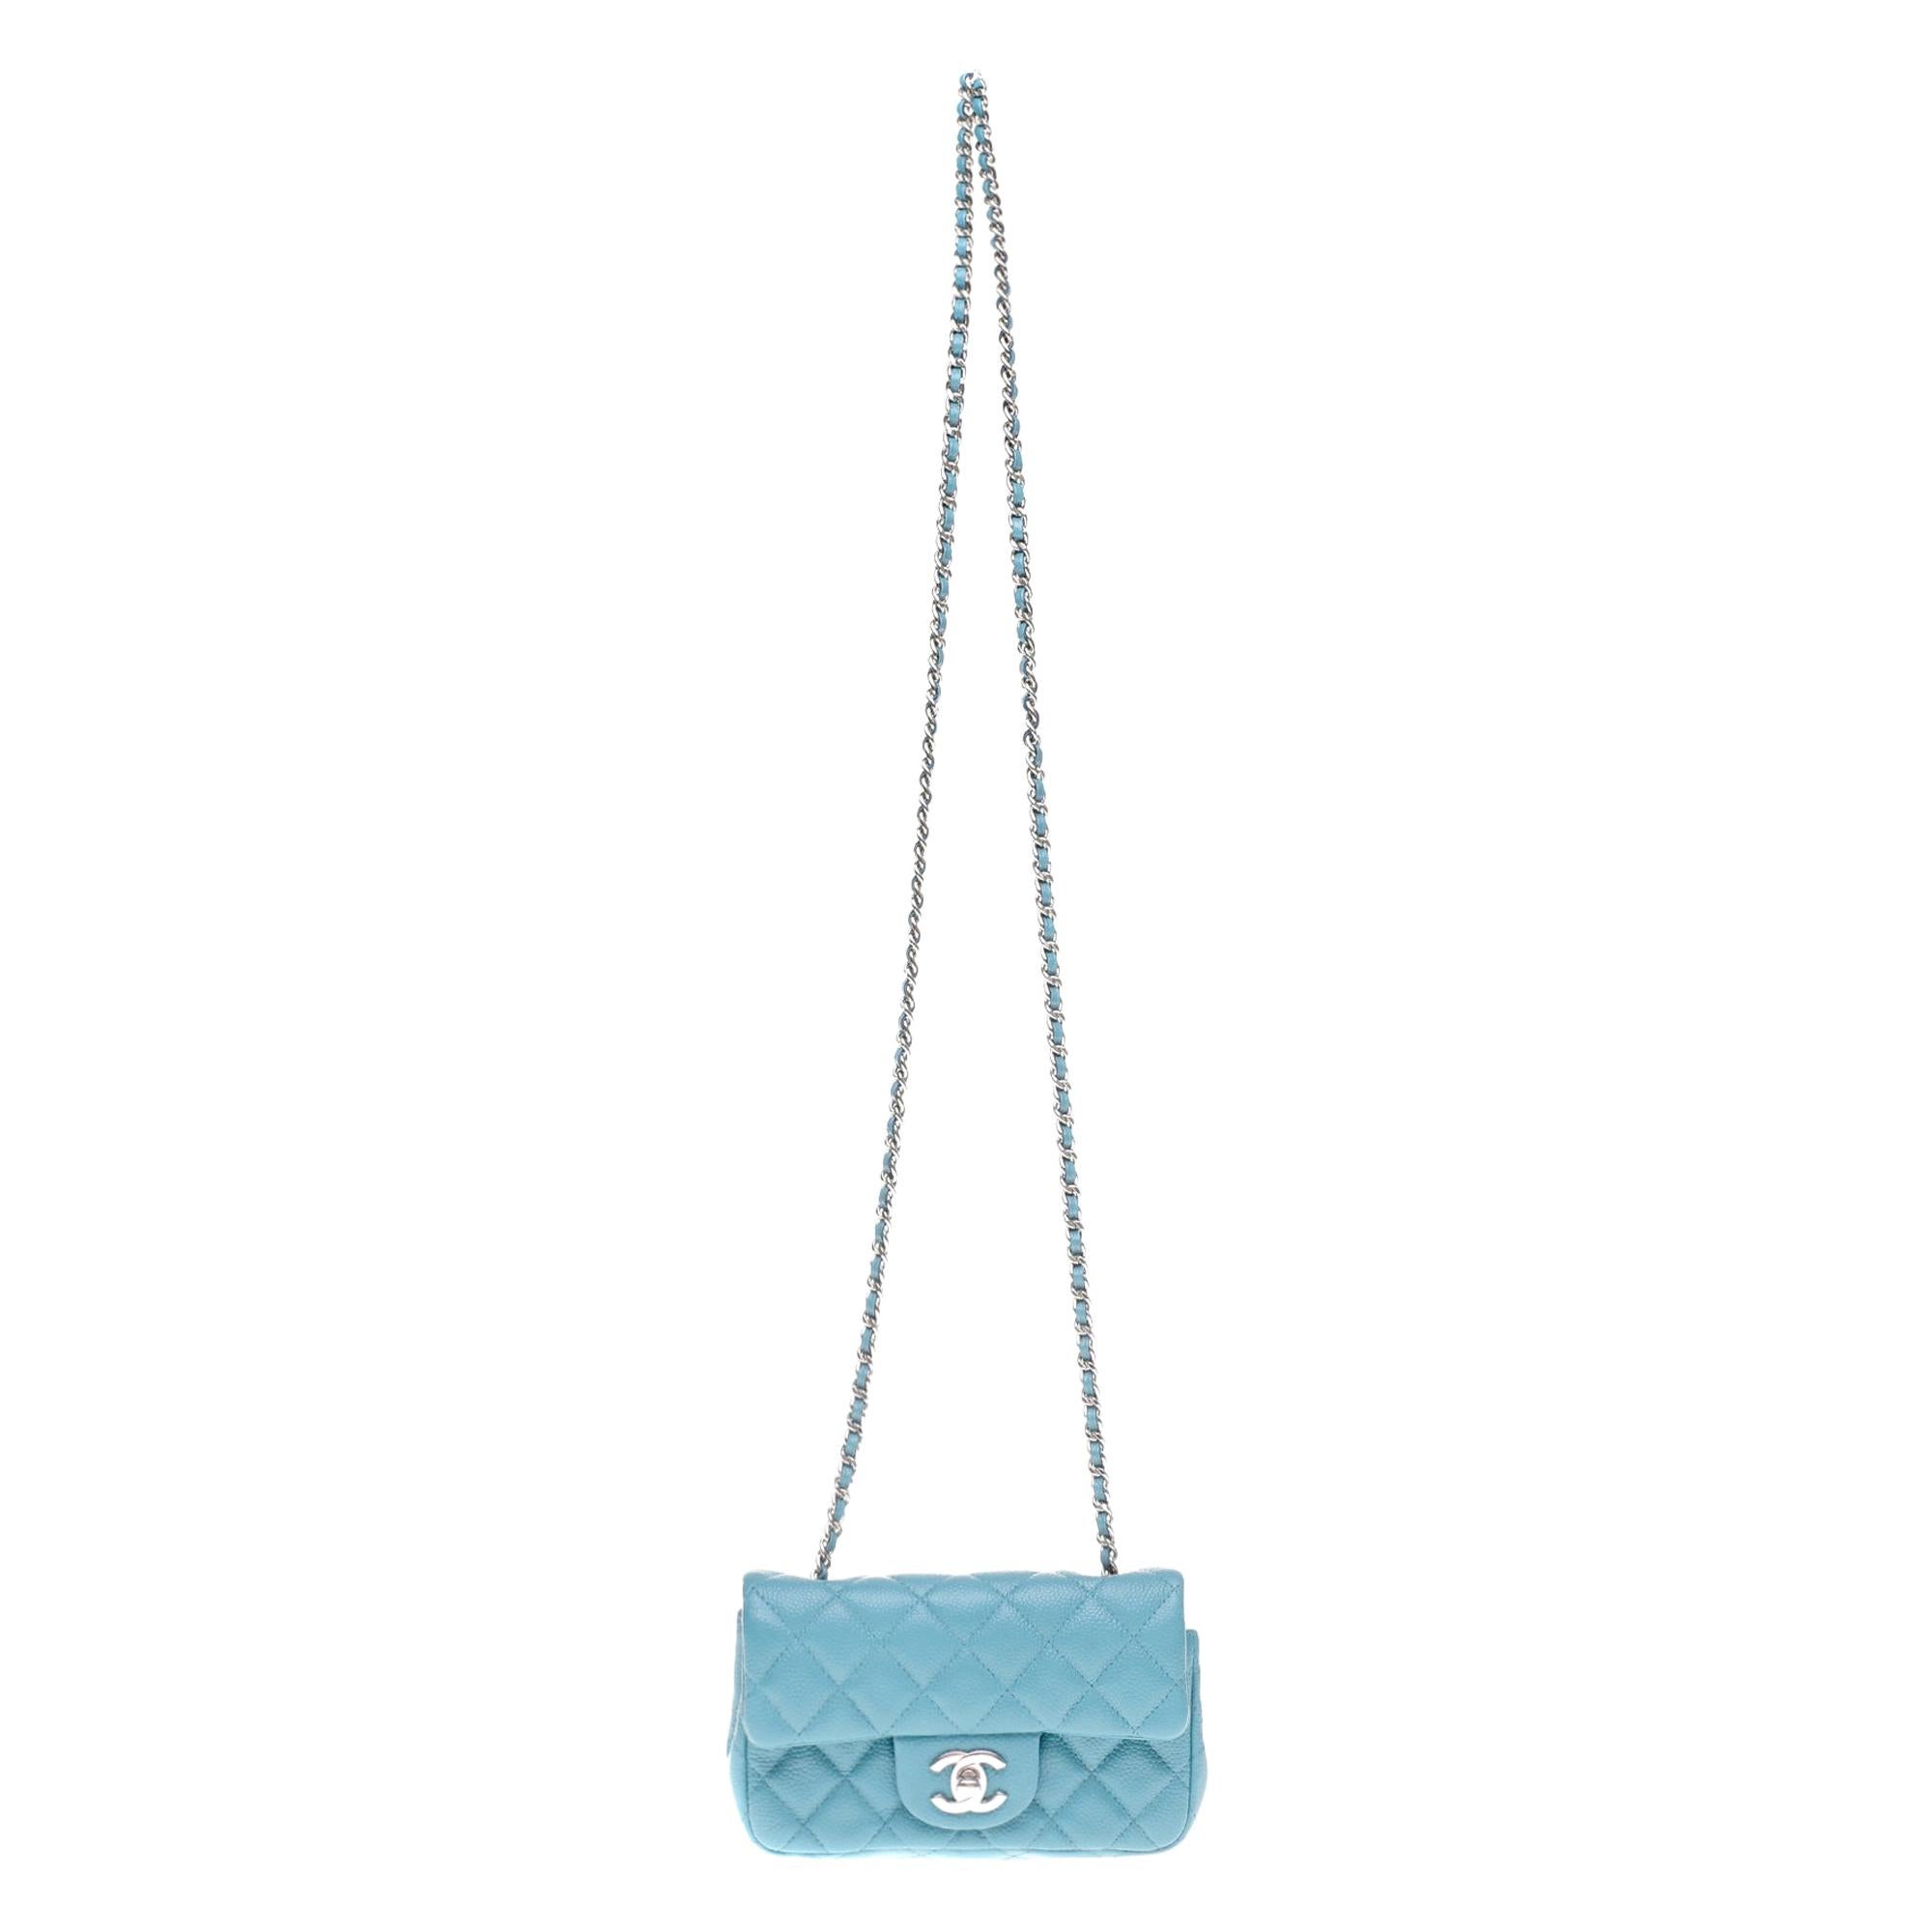 Stunning Mini Chanel shoulder bag in turquoise caviar leather, silver hardware